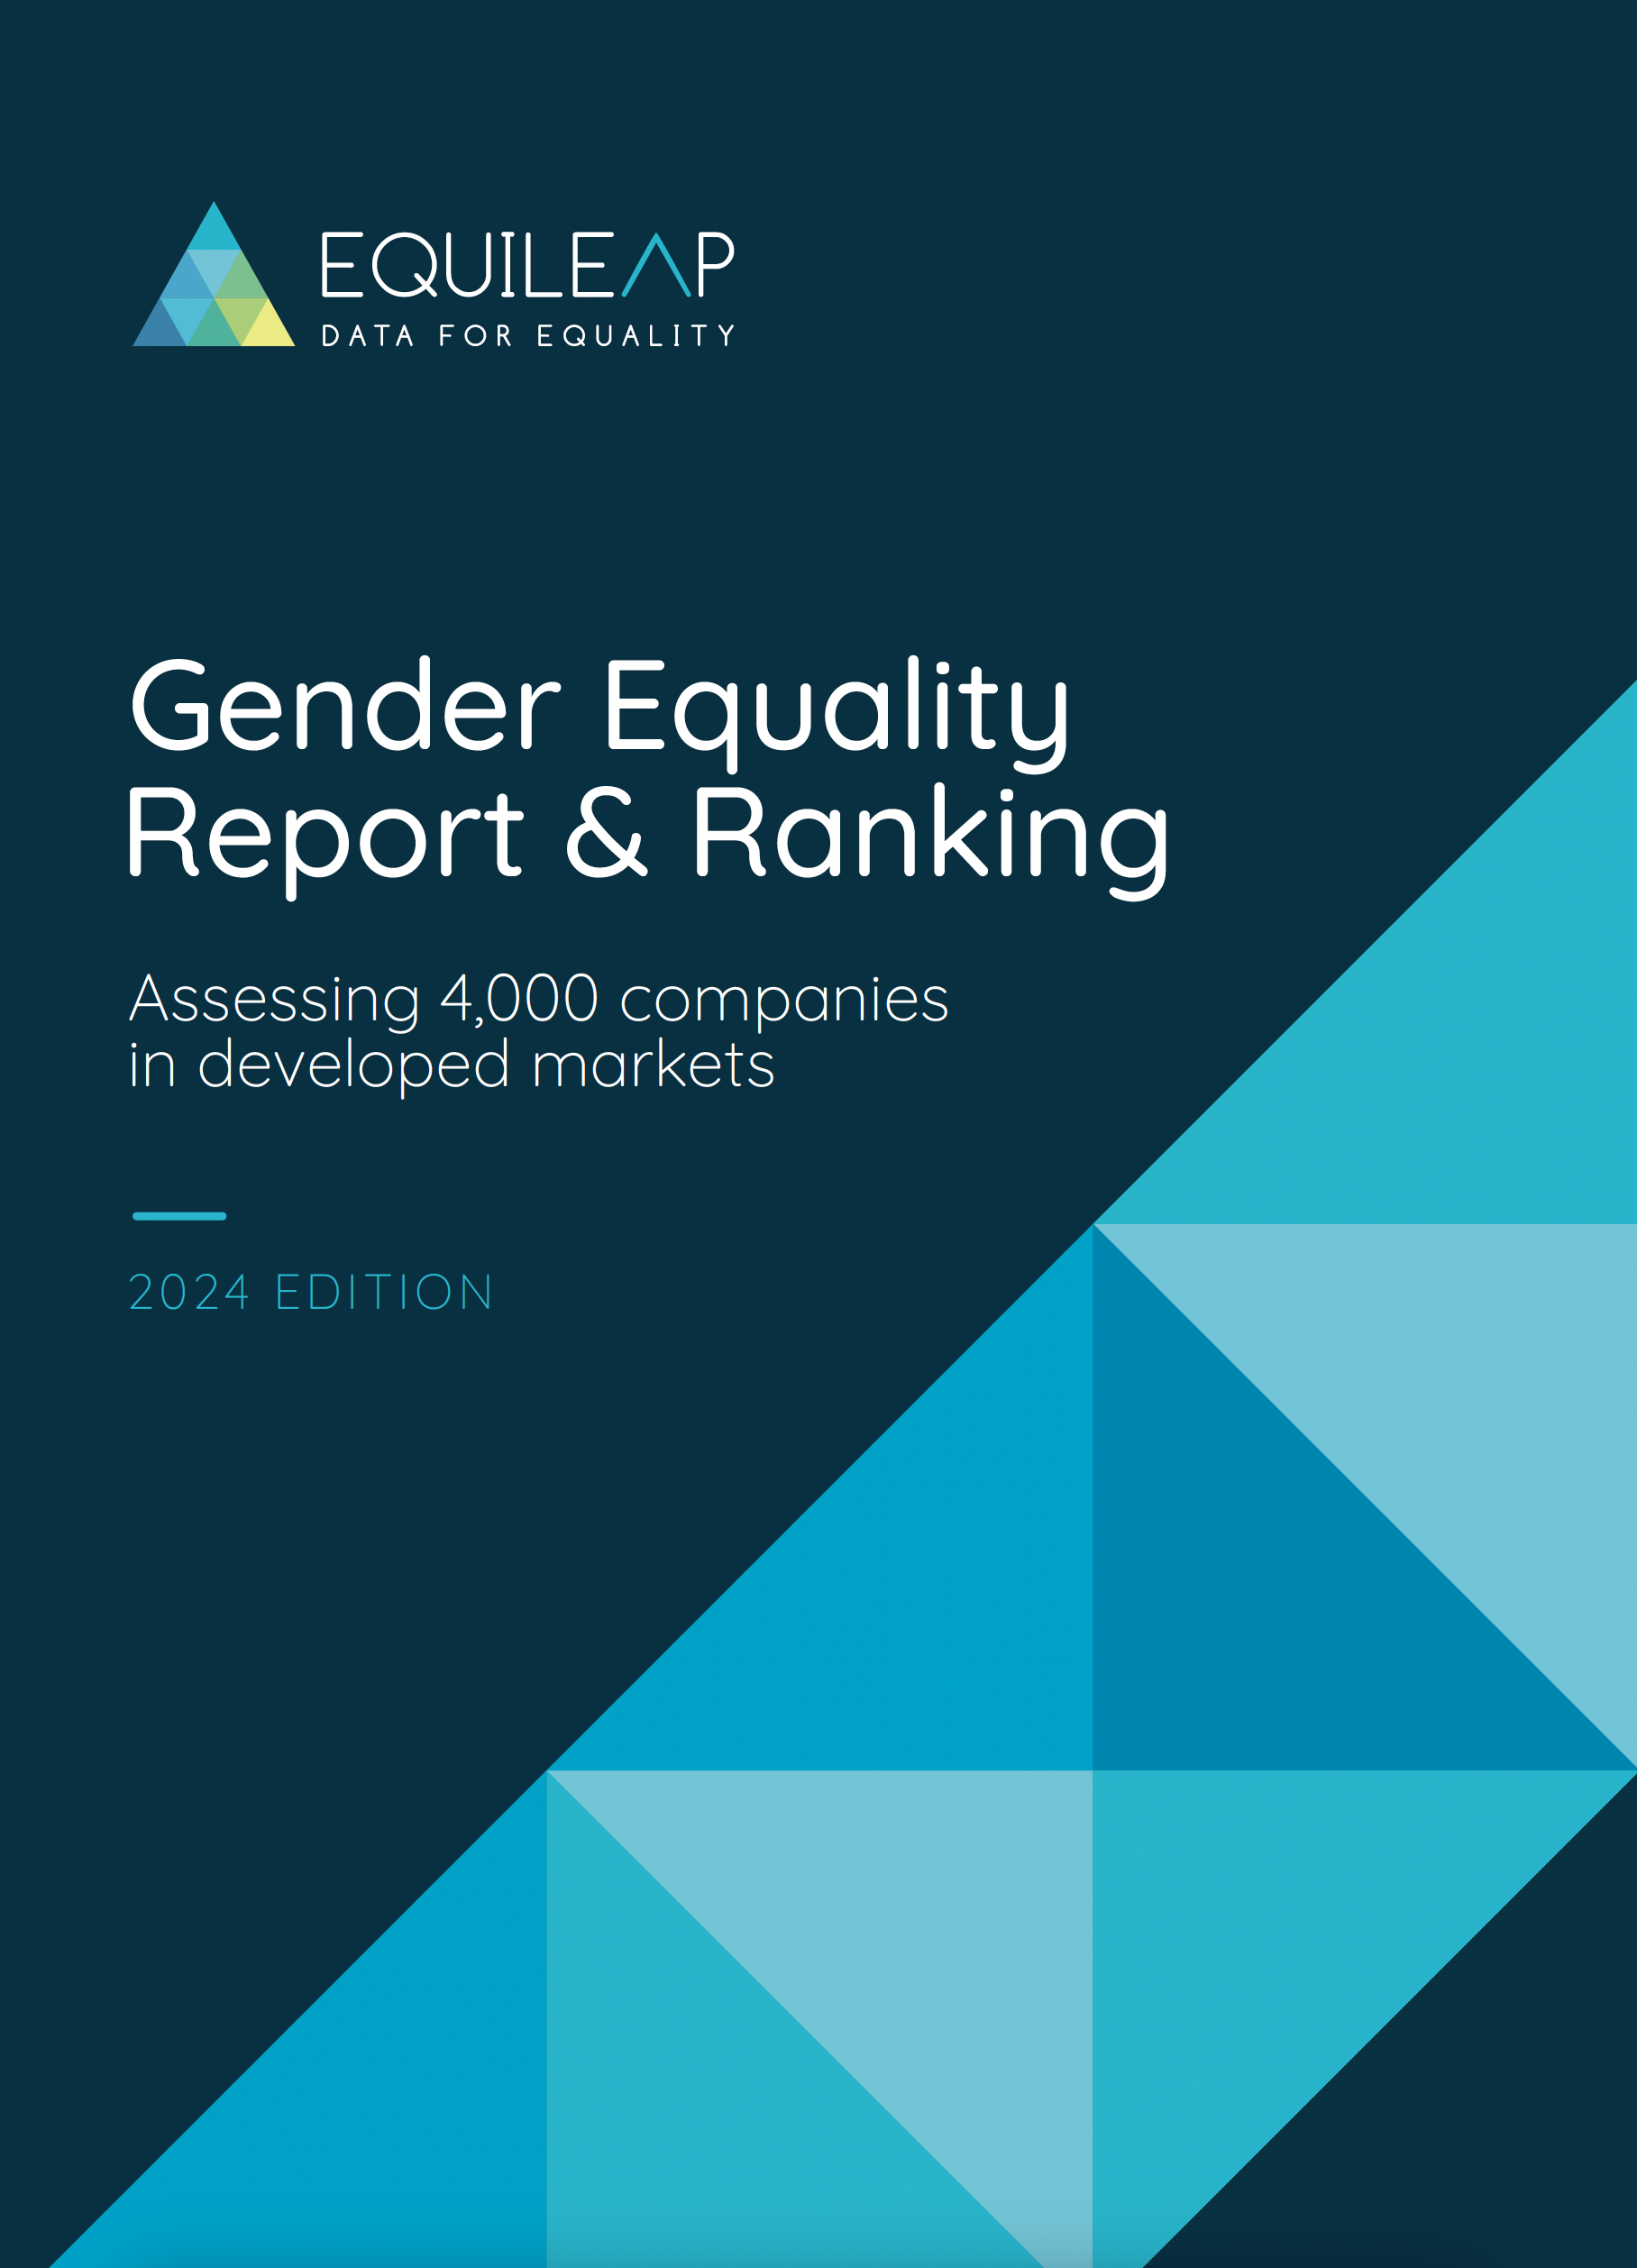 Gender Equality Report & Ranking Assessing 4,000 companies in developed markets